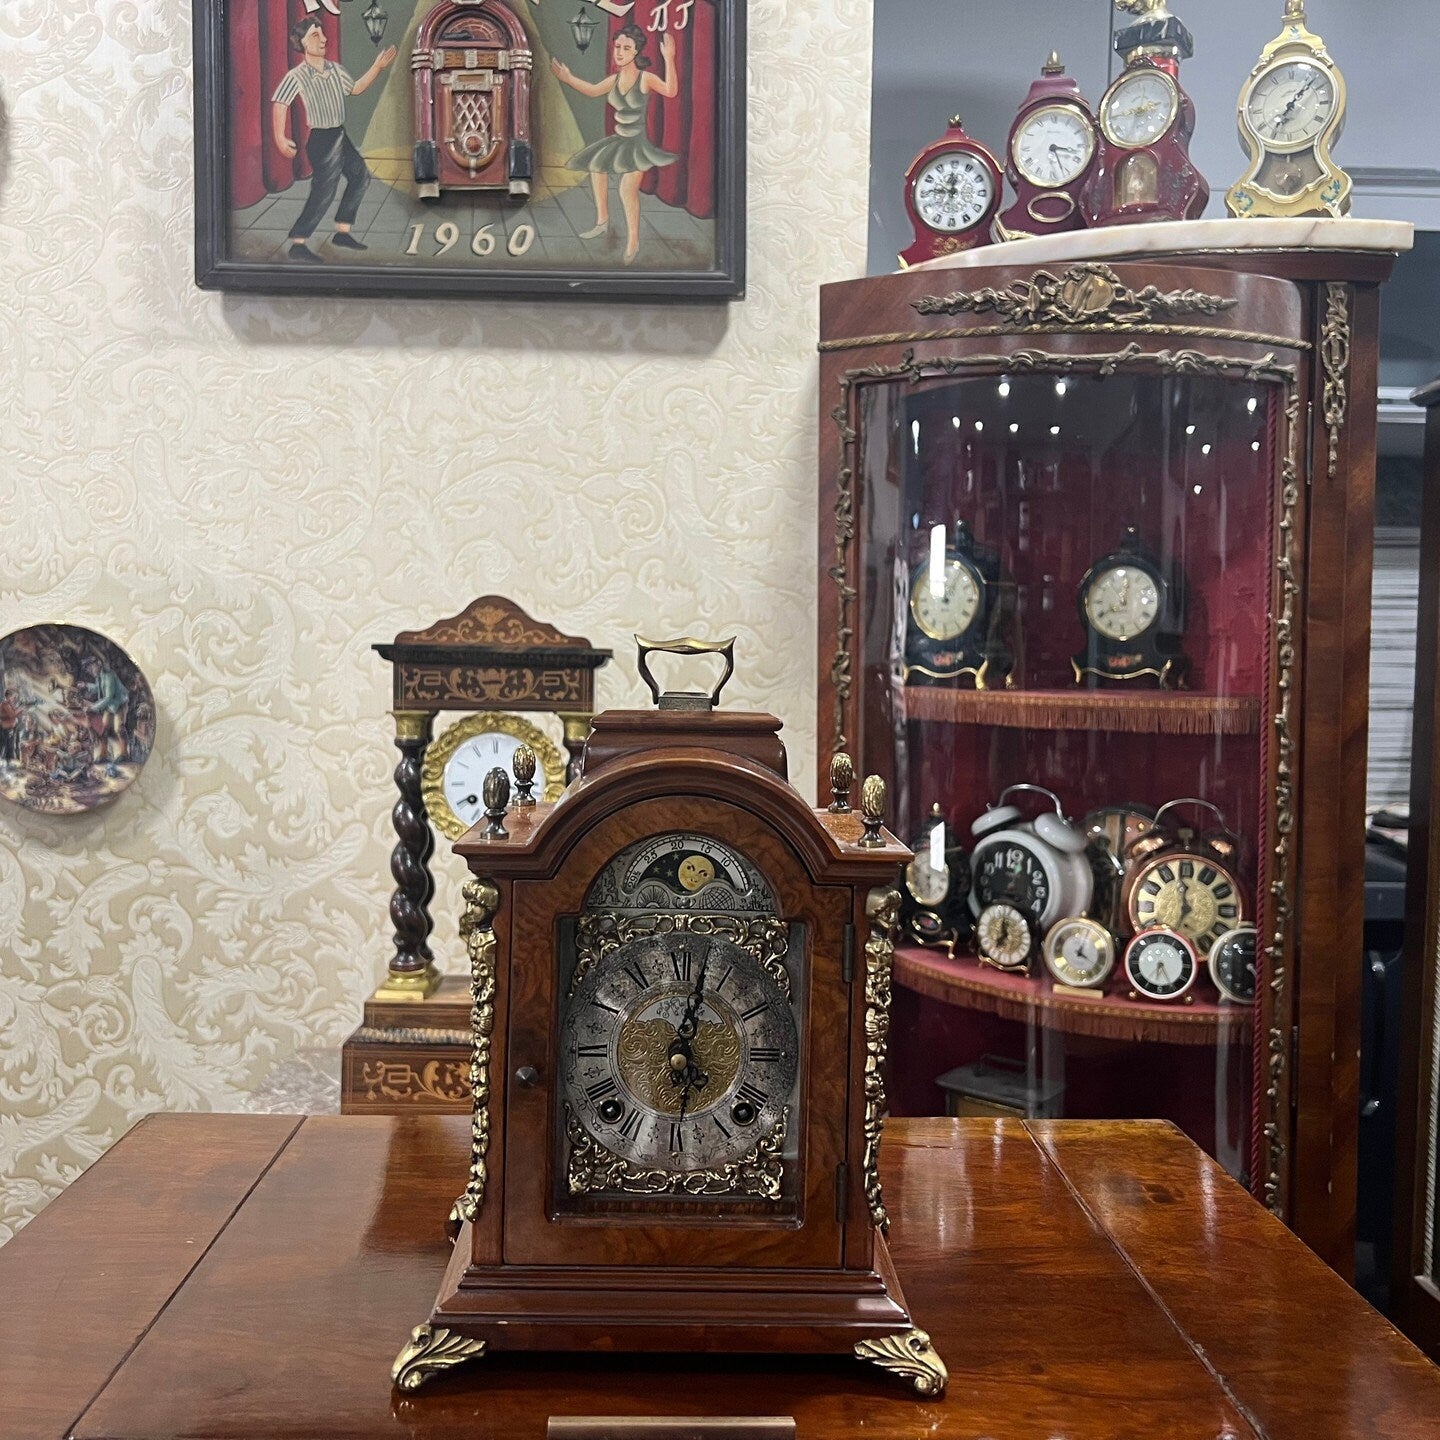 Antique Hermle Double Wind Wood Mantel Clock on Display with Other Collectible Timepieces